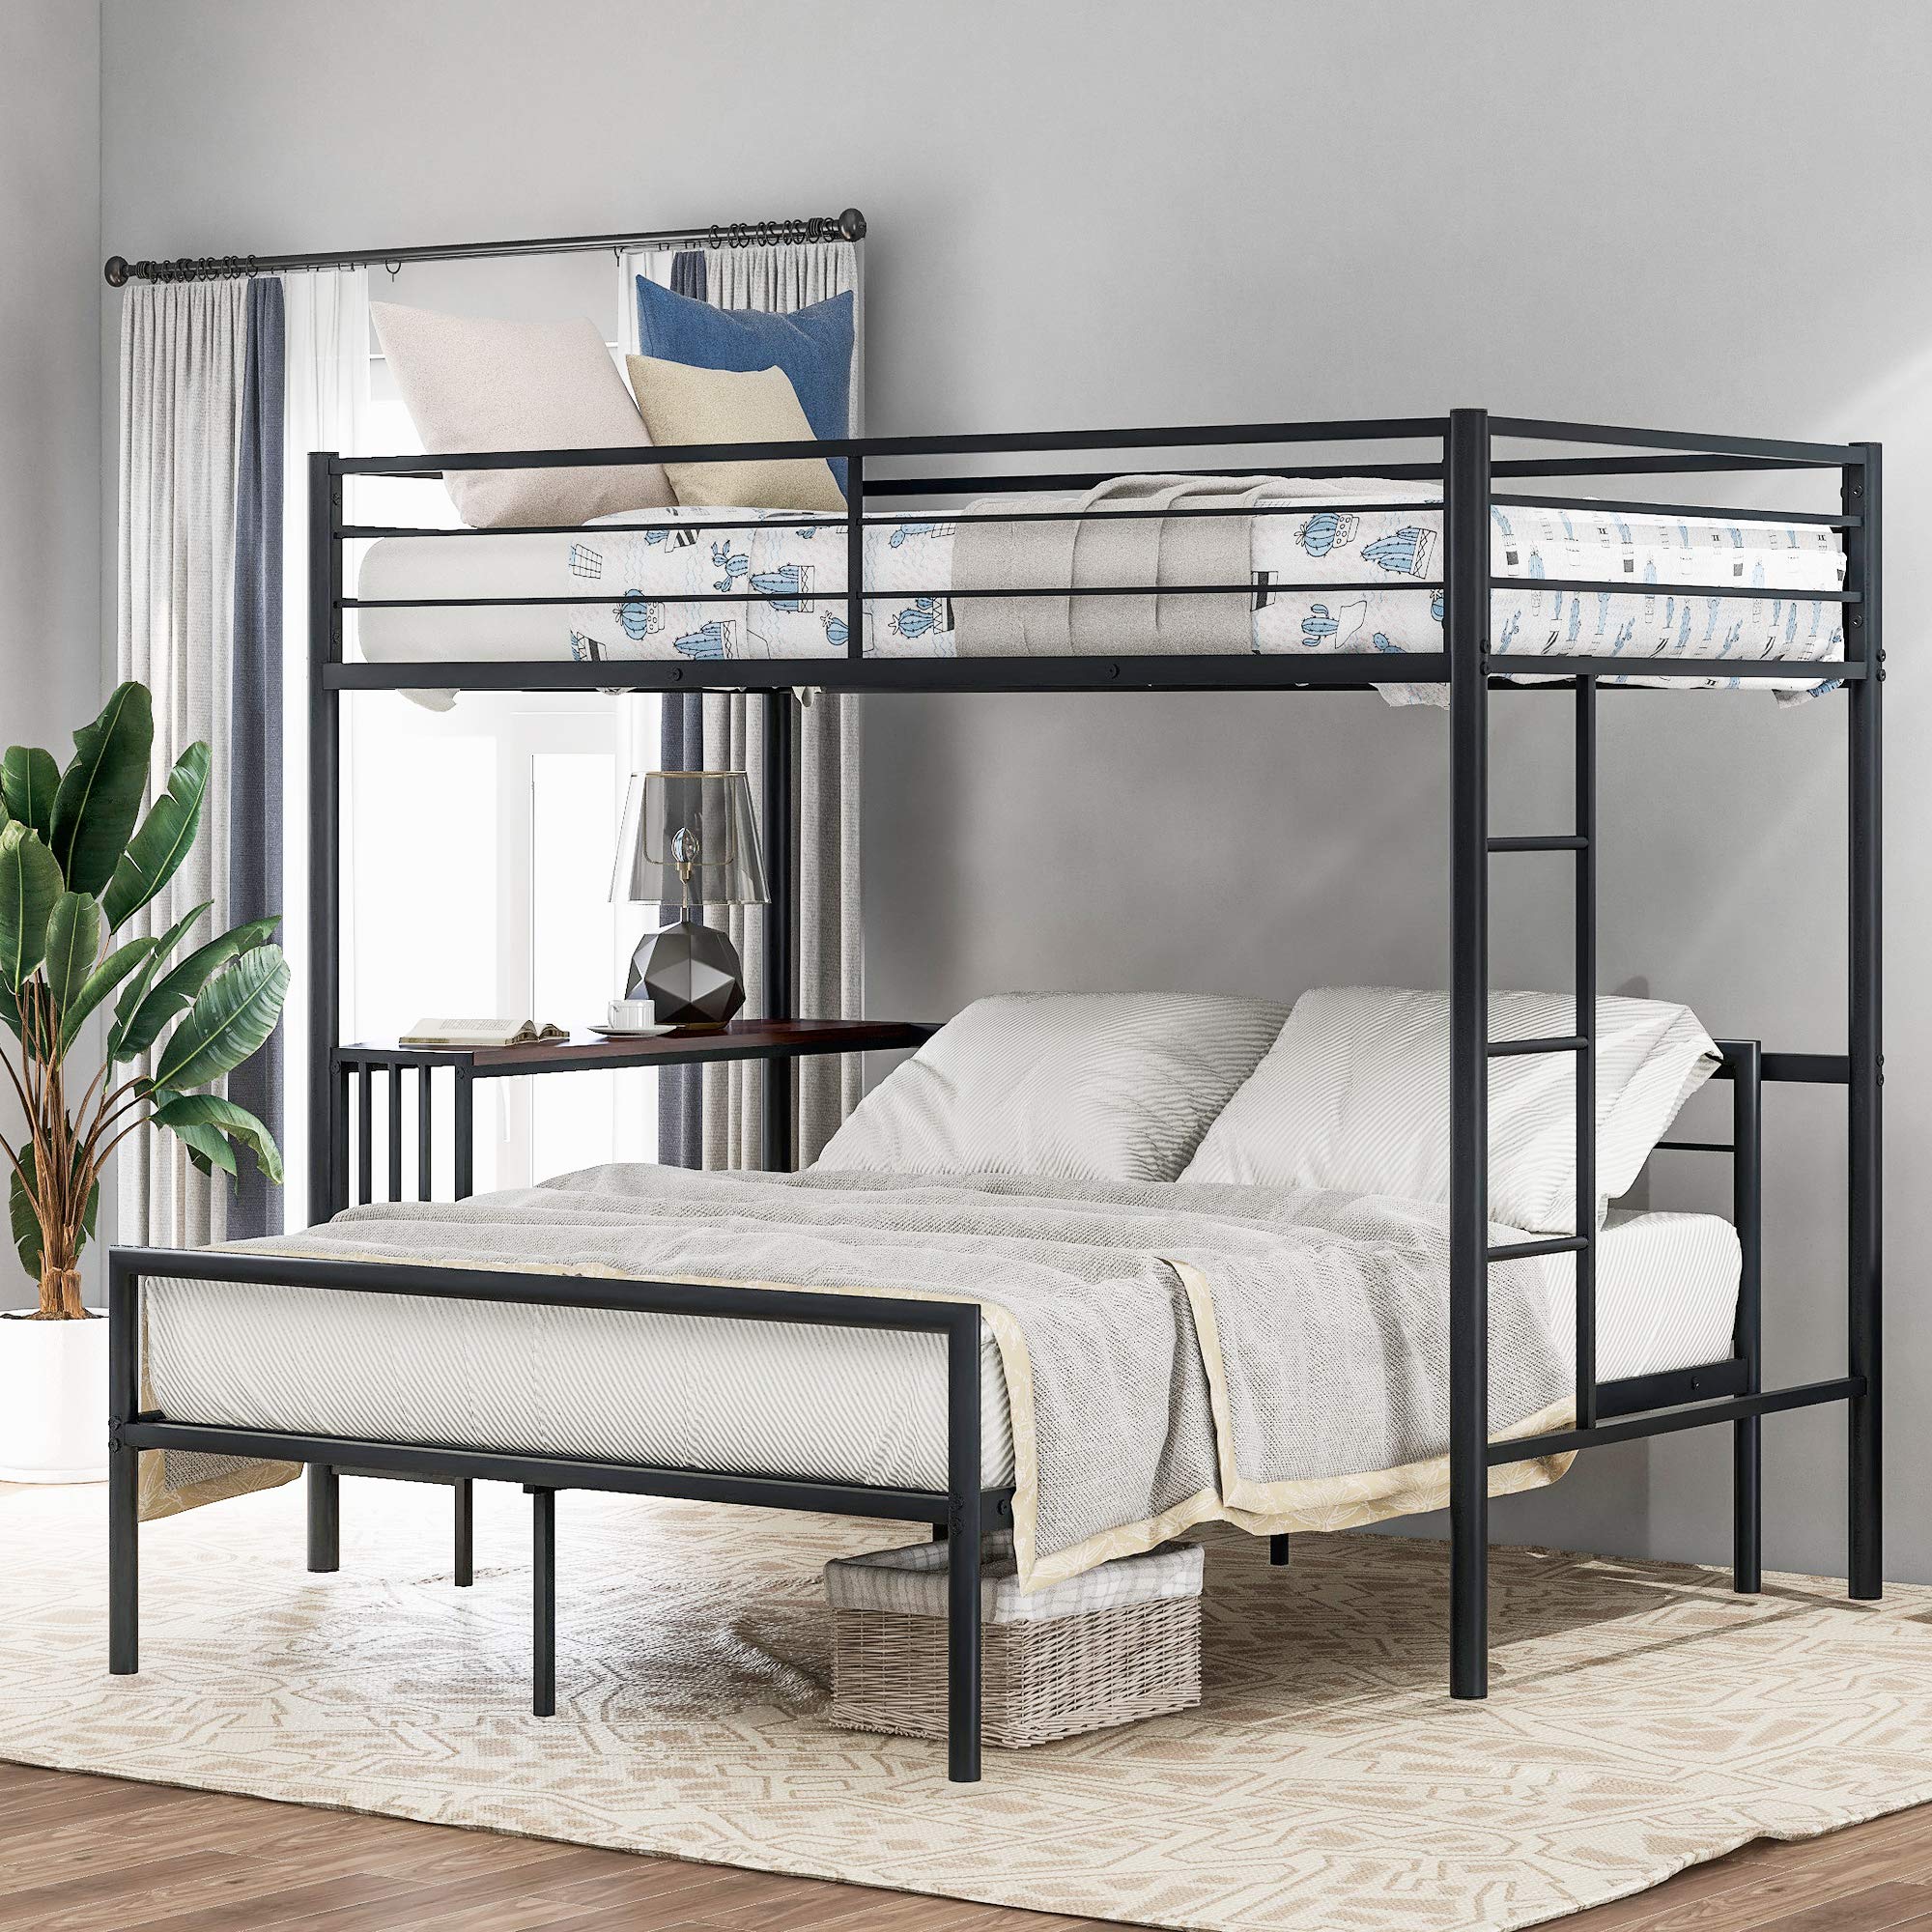 P PURLOVE Twin-Over-Full Bunk Bed Metal Bunk Bed with Full Size Platform Bed,Metal Bed Frame with Ladder,Easy Assembly Heavy Dut